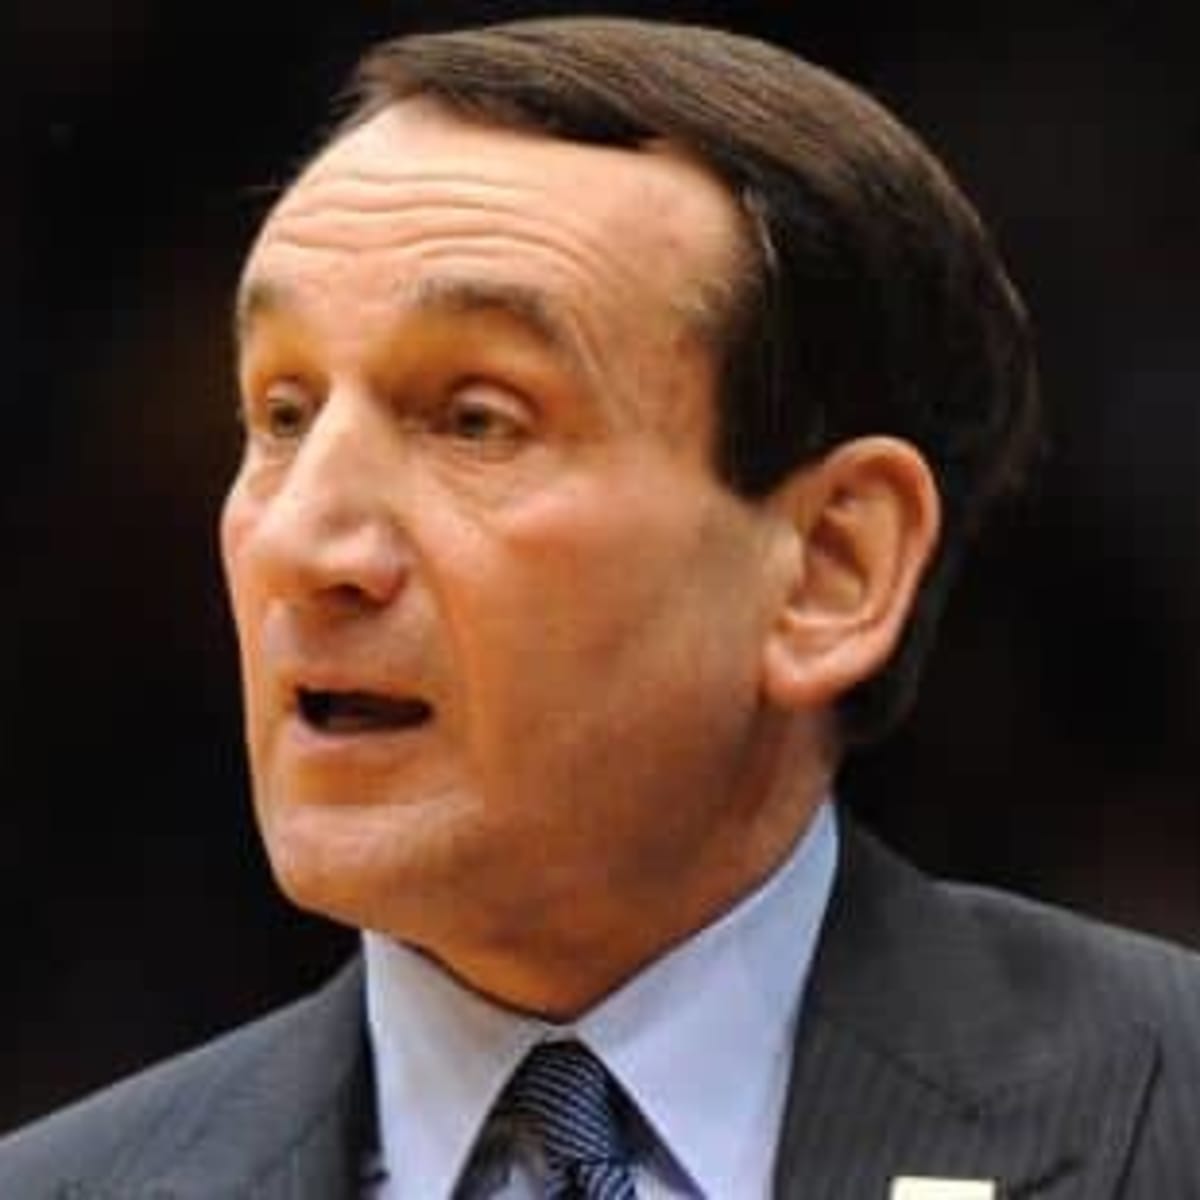 Coach K's advice for changing your team culture: 